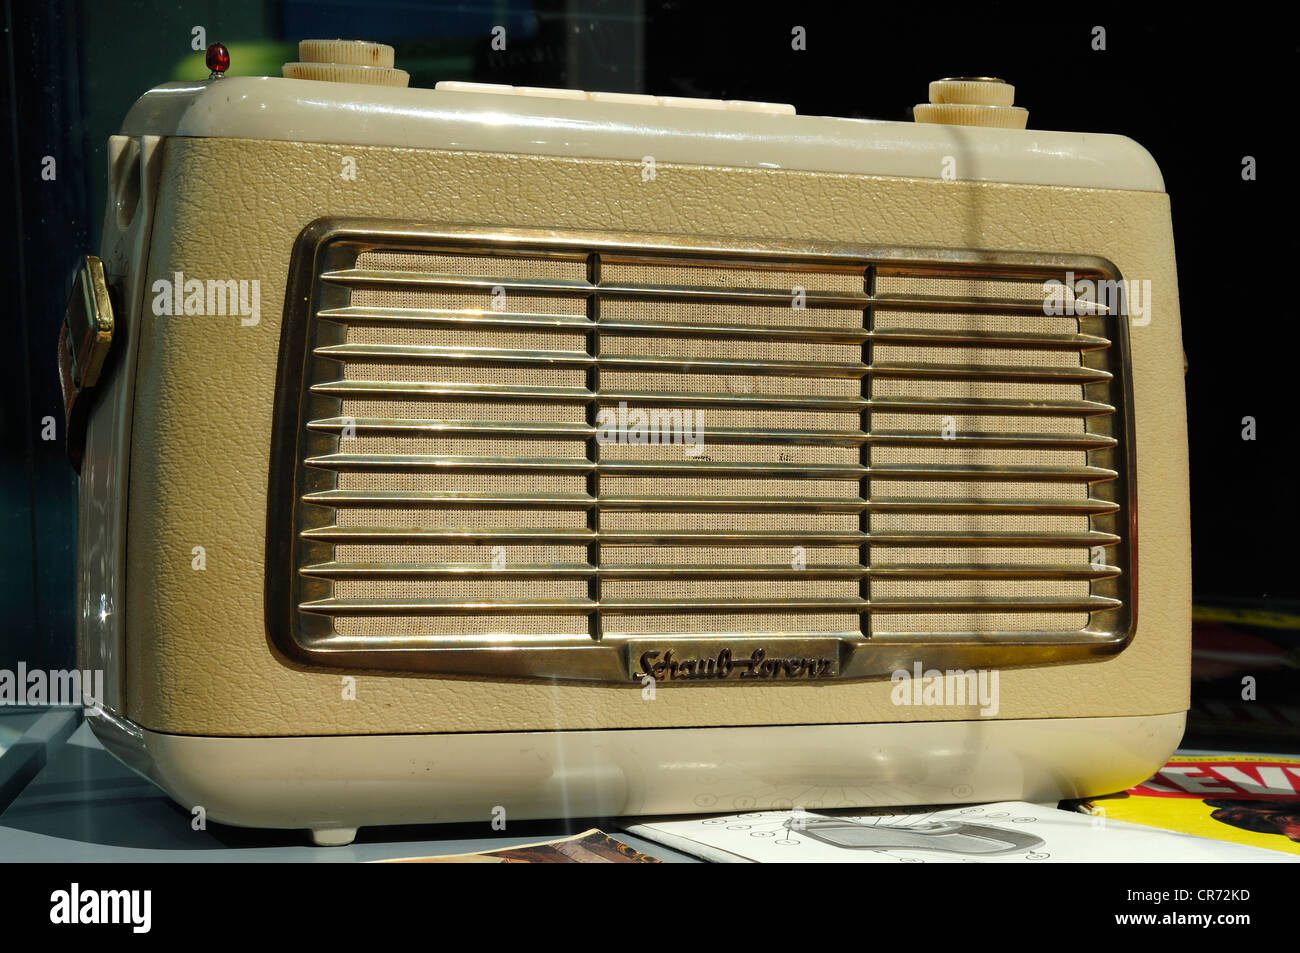 Portable radio by the Schaub-Lorenz company from the '50s, 2011 exhibition,  Museum for Industrial Culture, Aeussere Sulzbacher Stock Photo - Alamy